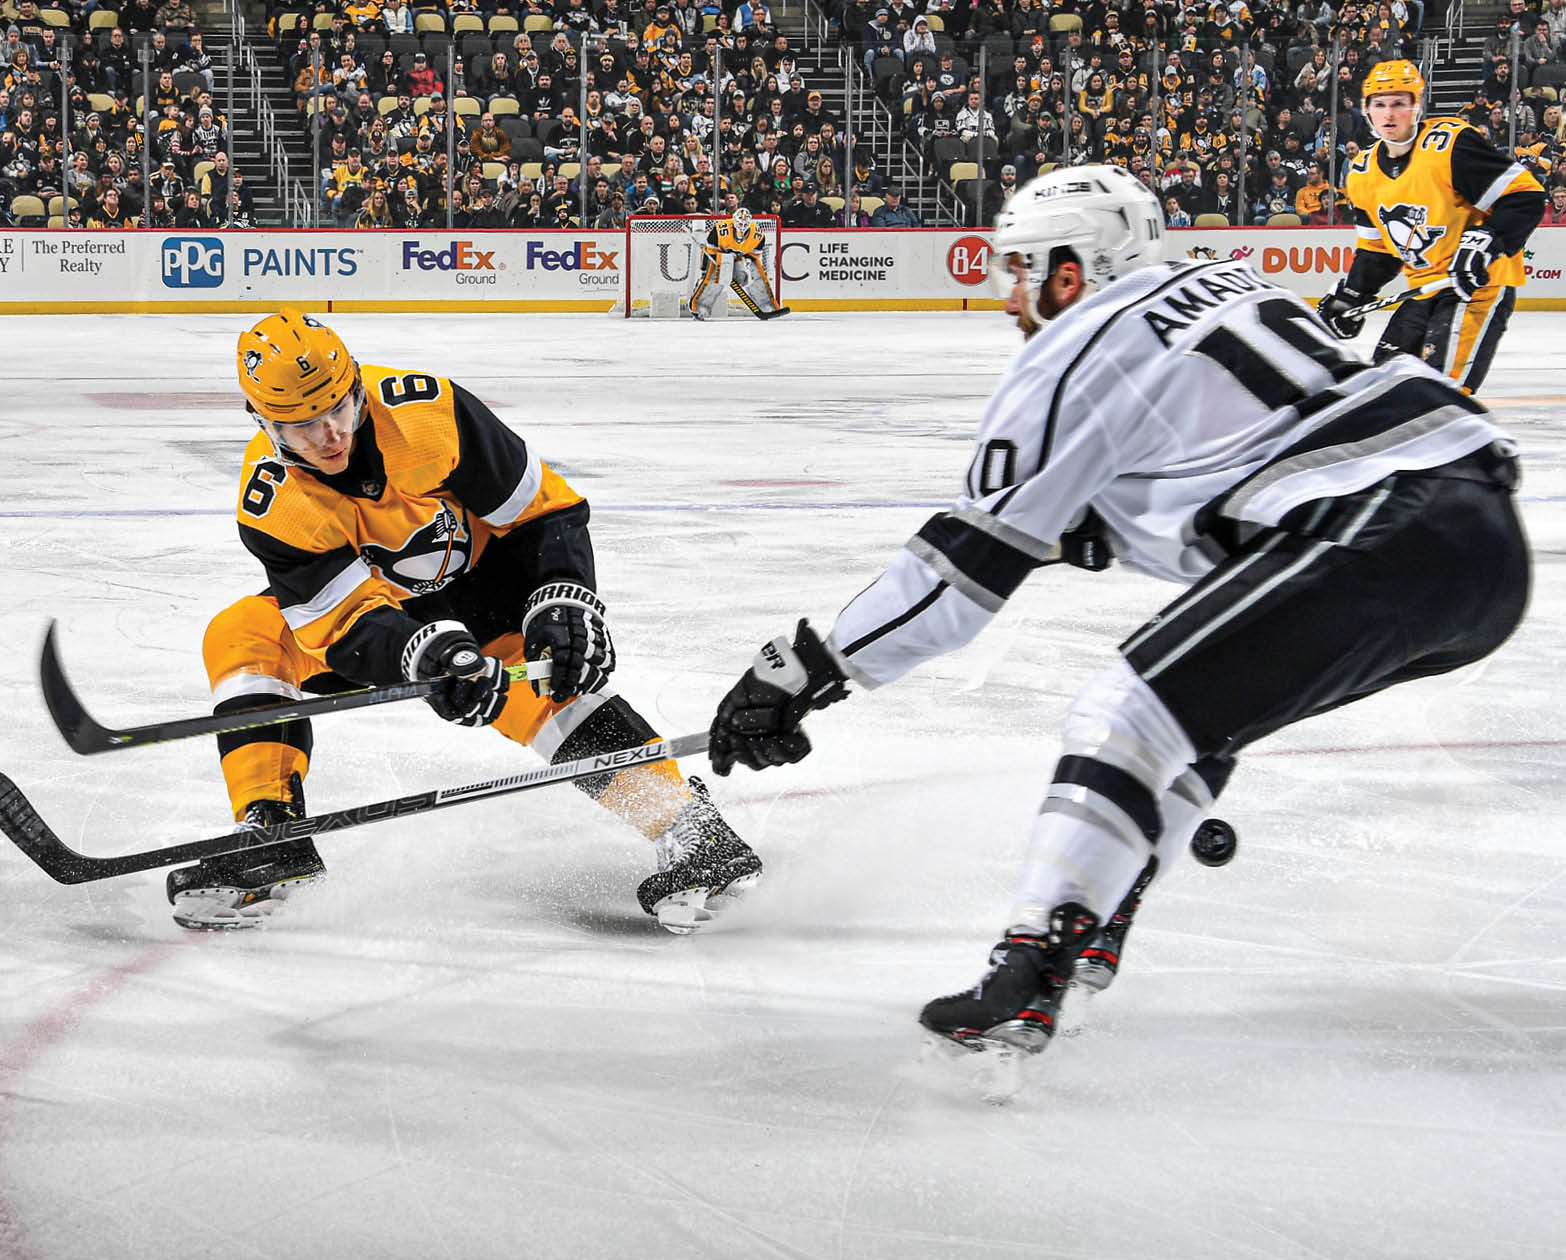 December 14, 2019 - Pittsburgh Penguins vs Los Angeles Kings at PPG Paints Arena  Pittsburgh won the game 5-4 in a shootout 